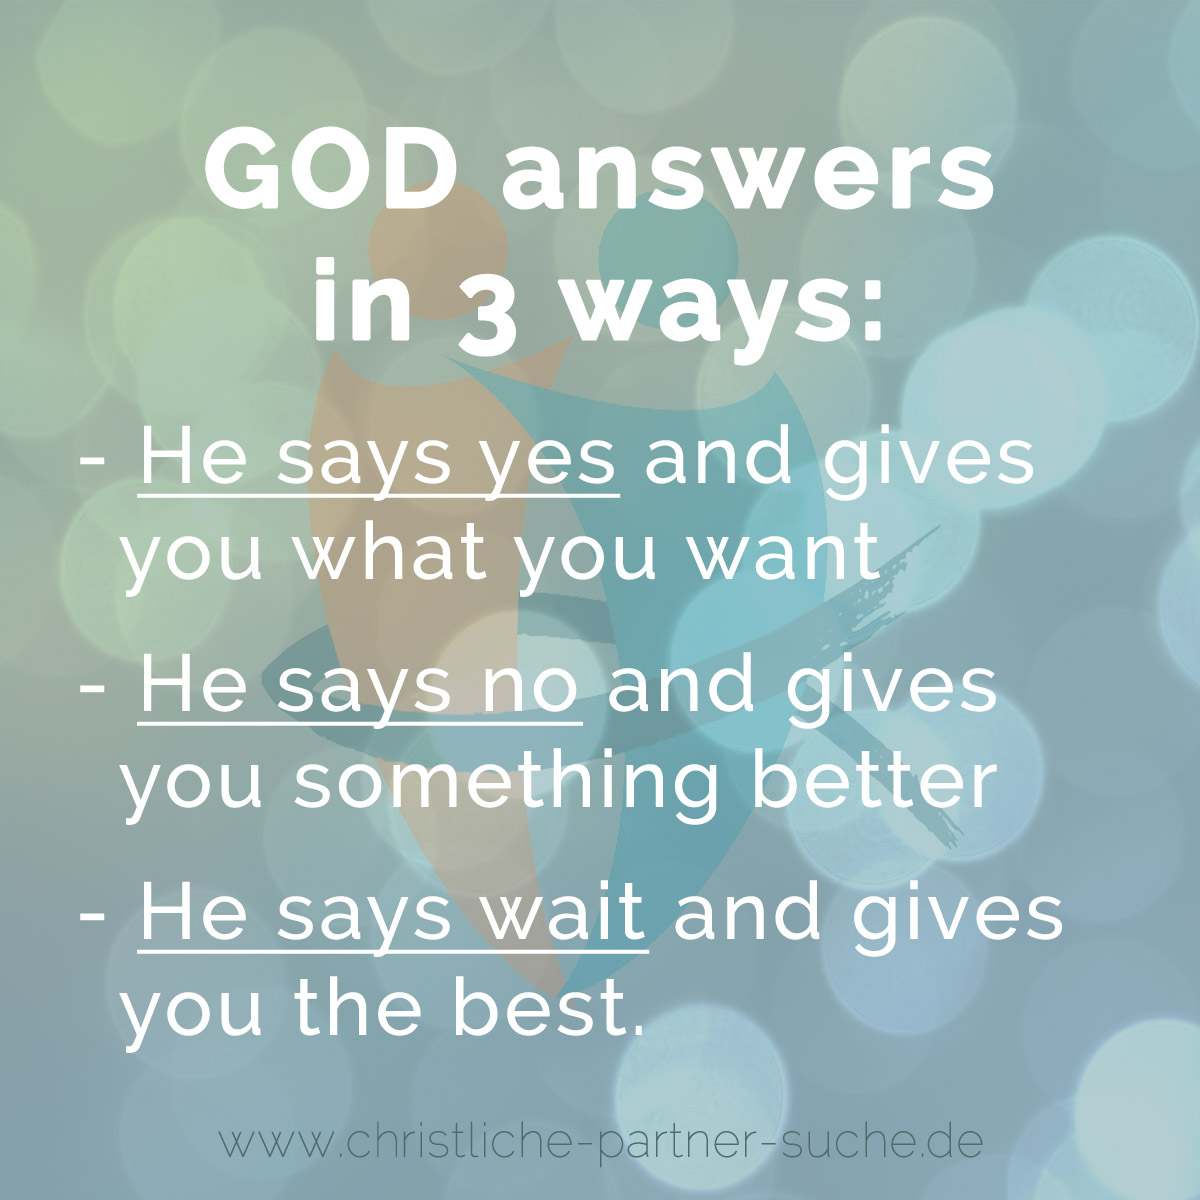 GOD answers in 3 ways